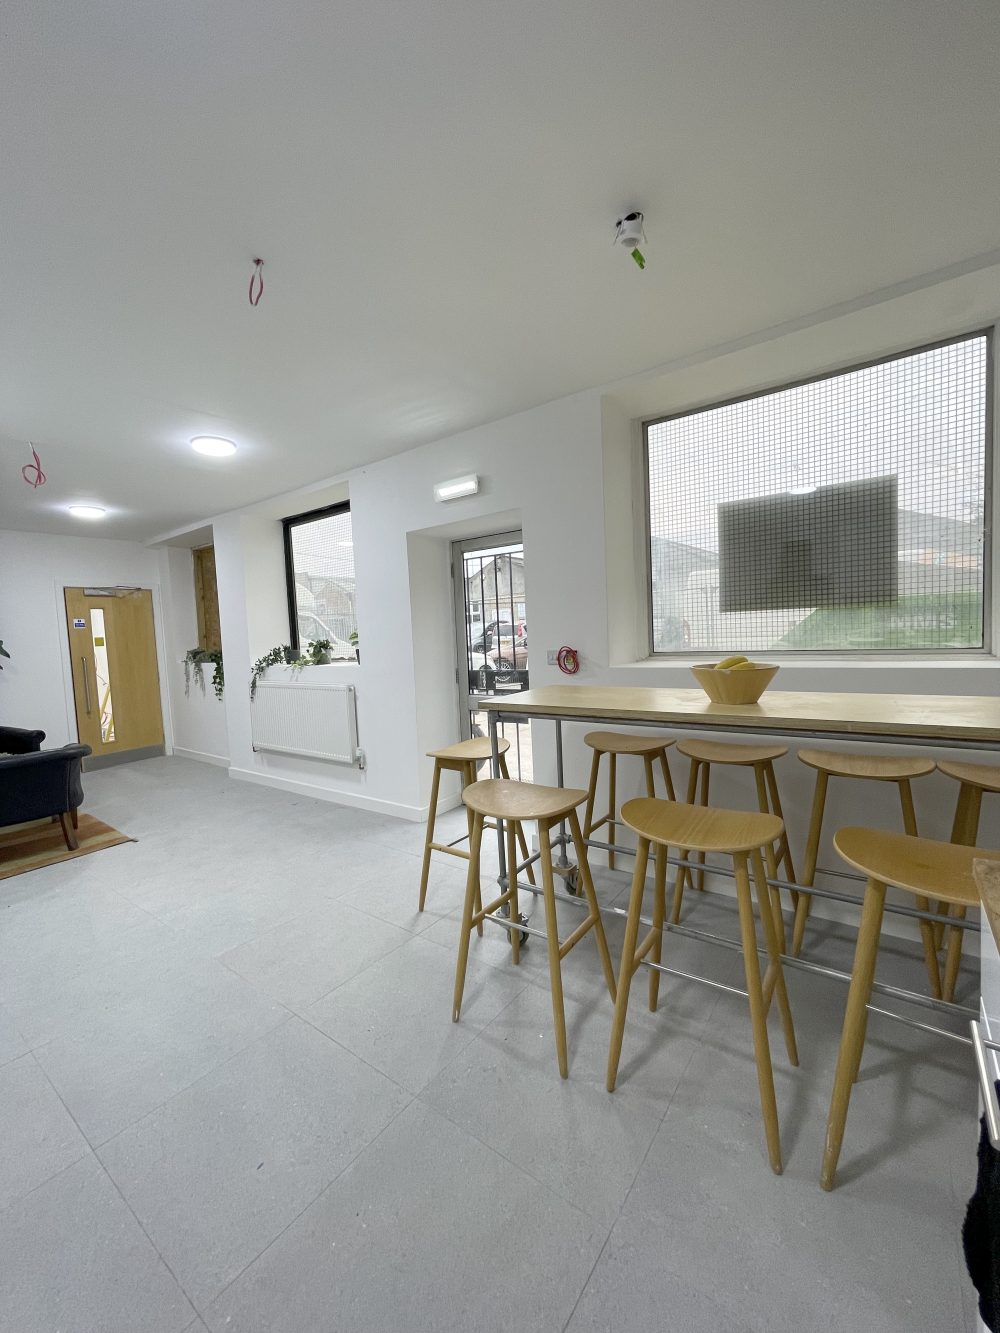 Creative live work style Studio flat Available to rent in EN3 Enfield Alxandra rd Pic23